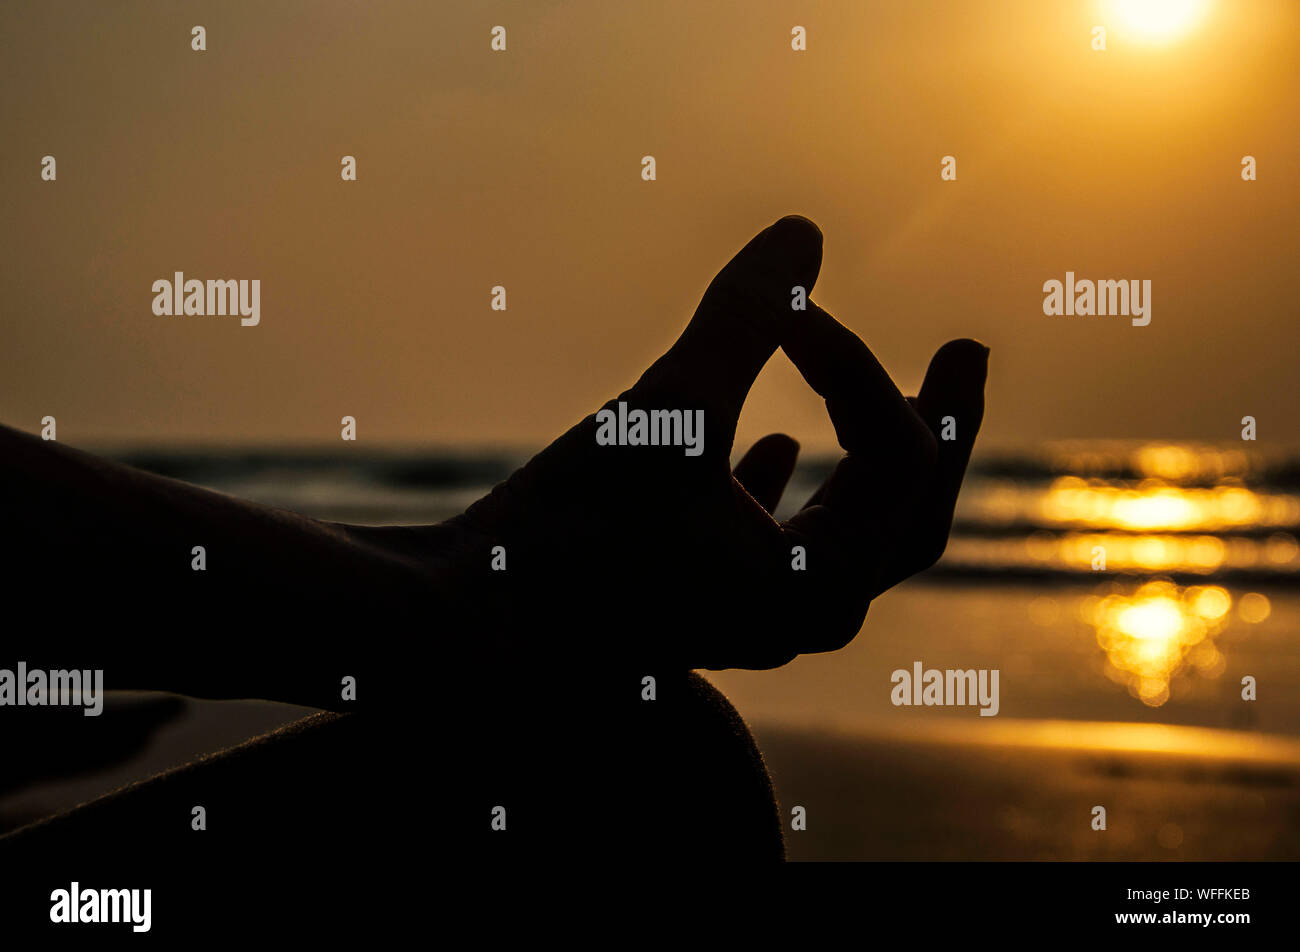 Silhouette Hand In Meditating Posture Stock Photo